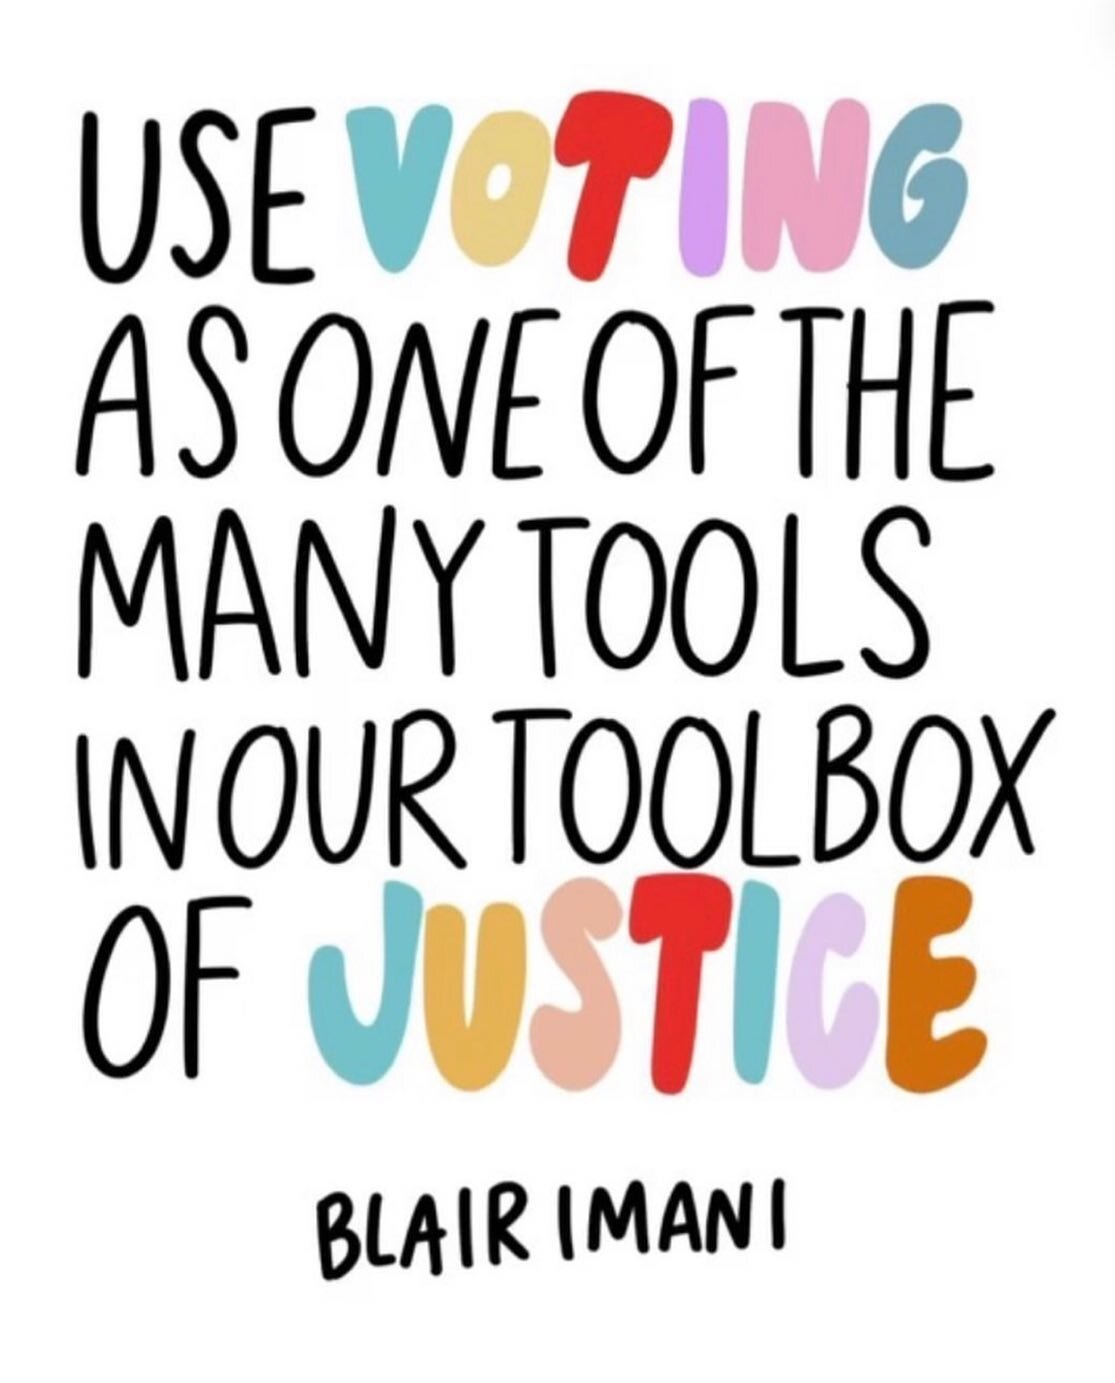 &ldquo;use voting as one of the many tools in our toolbox of justice&rdquo; @blairimani 🎨 art by @zeaink
&bull; V🗣TE  V🌈TE  VOT⚡️ V🌎TE ✔️OTE  V🗳TE &bull;